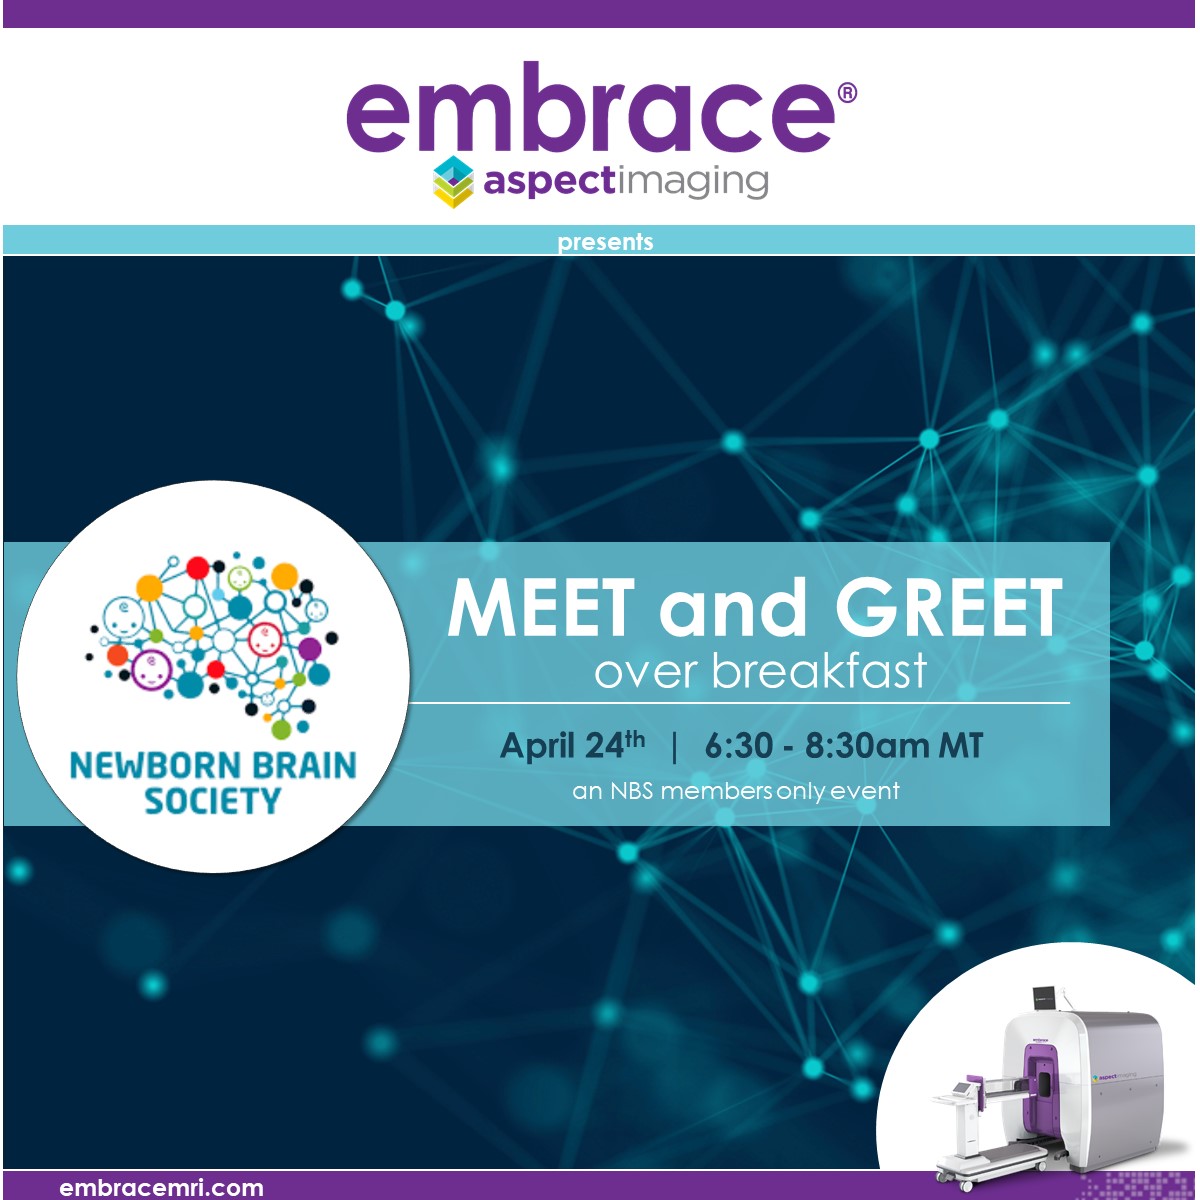 Attention Newborn Brain Society Members! Aspect Imaging is proud to sponsor the members only Meet and Greet over Breakfast, April 24th at PAS 2022, with a special honorary award ceremony for Dr. Donna Ferriero. RSVP: ow.ly/MGP050IKclU  #PAS2022  #NBSatPAS